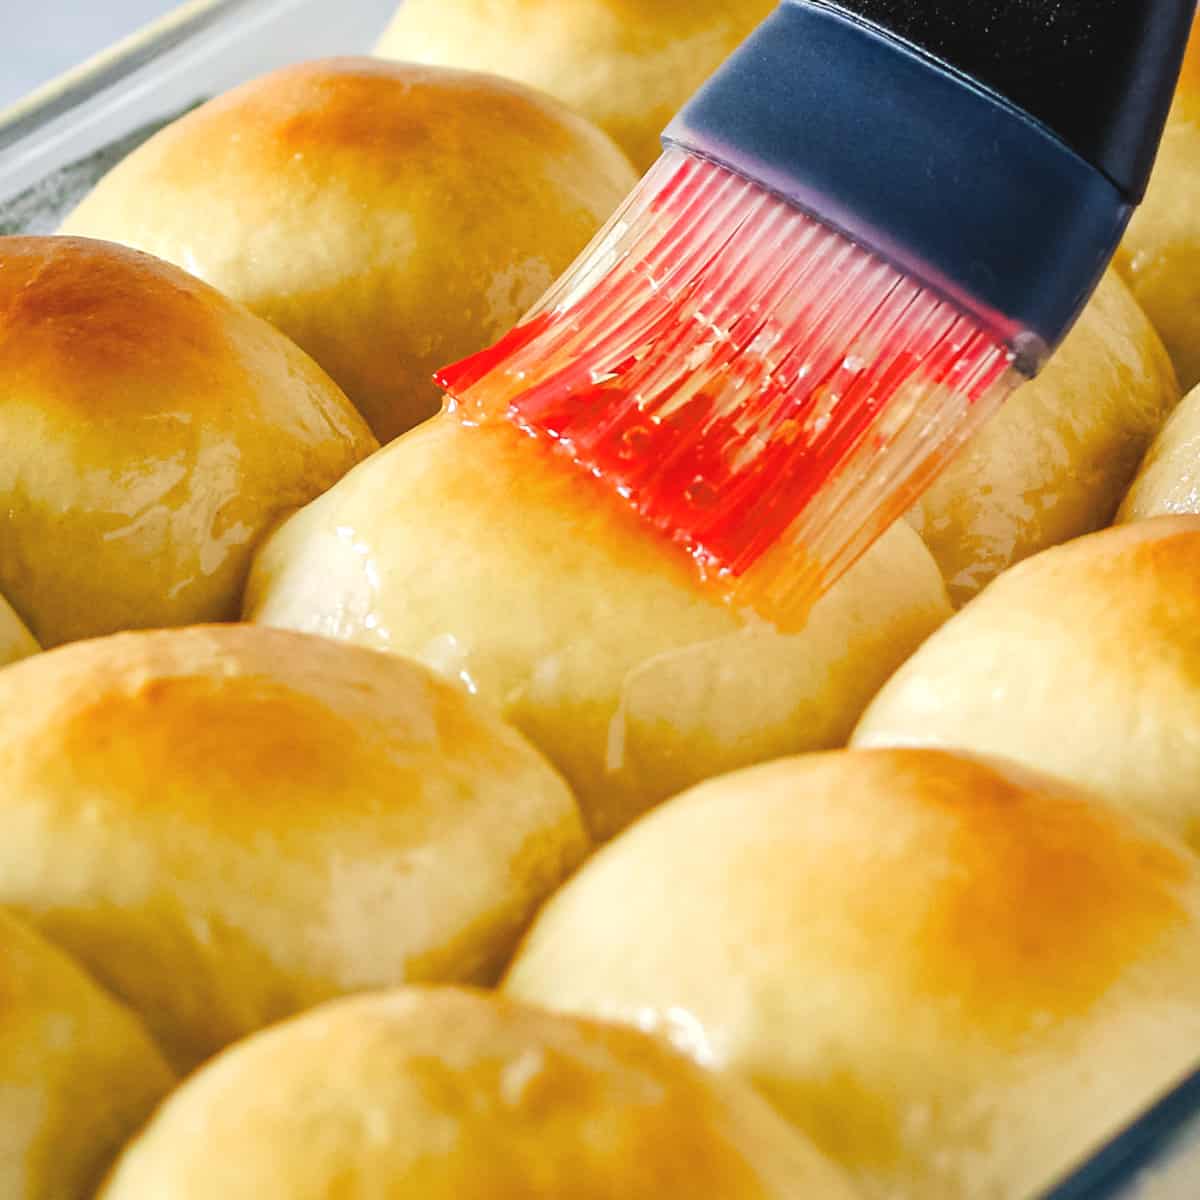 Brushing the tops of the bread rolls with melted butter.